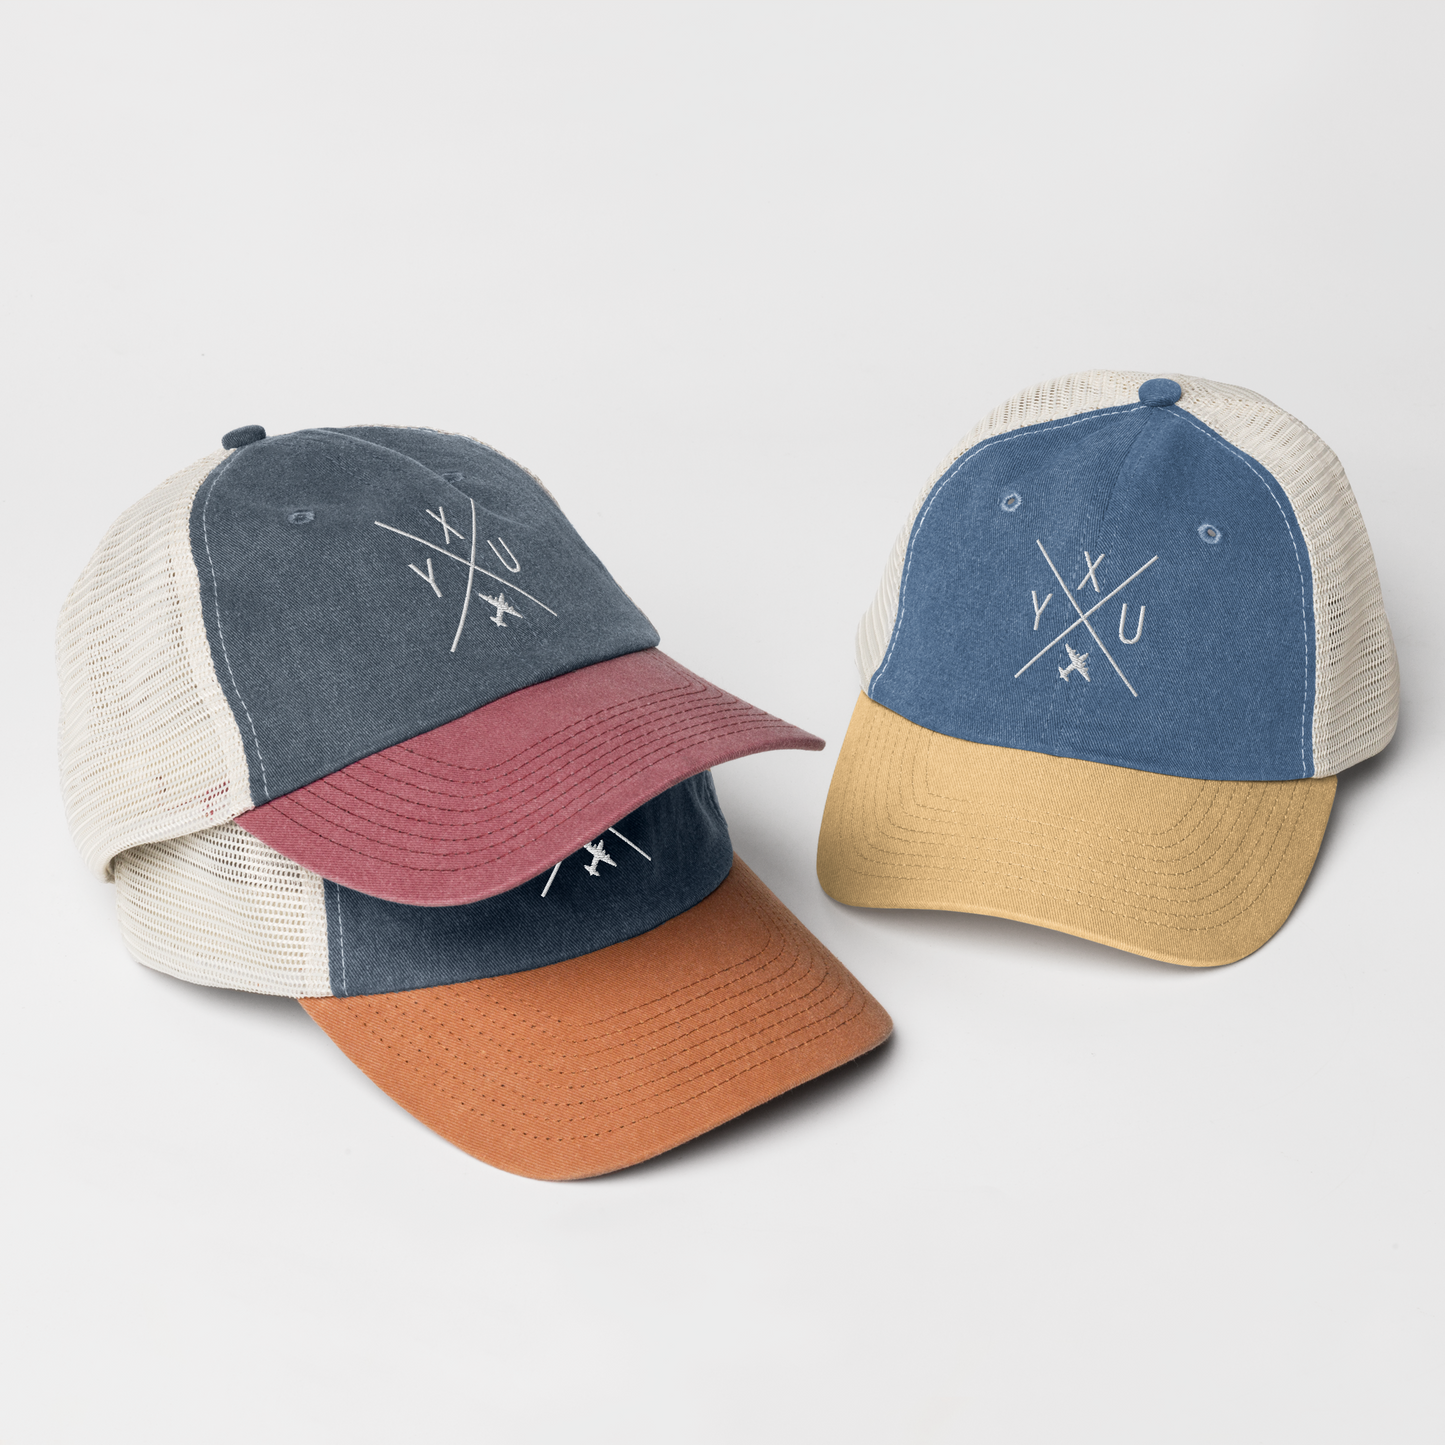 YHM Designs - YXU London Pigment-Dyed Trucker Cap - Crossed-X Design with Airport Code and Vintage Propliner - White Embroidery - Image 05